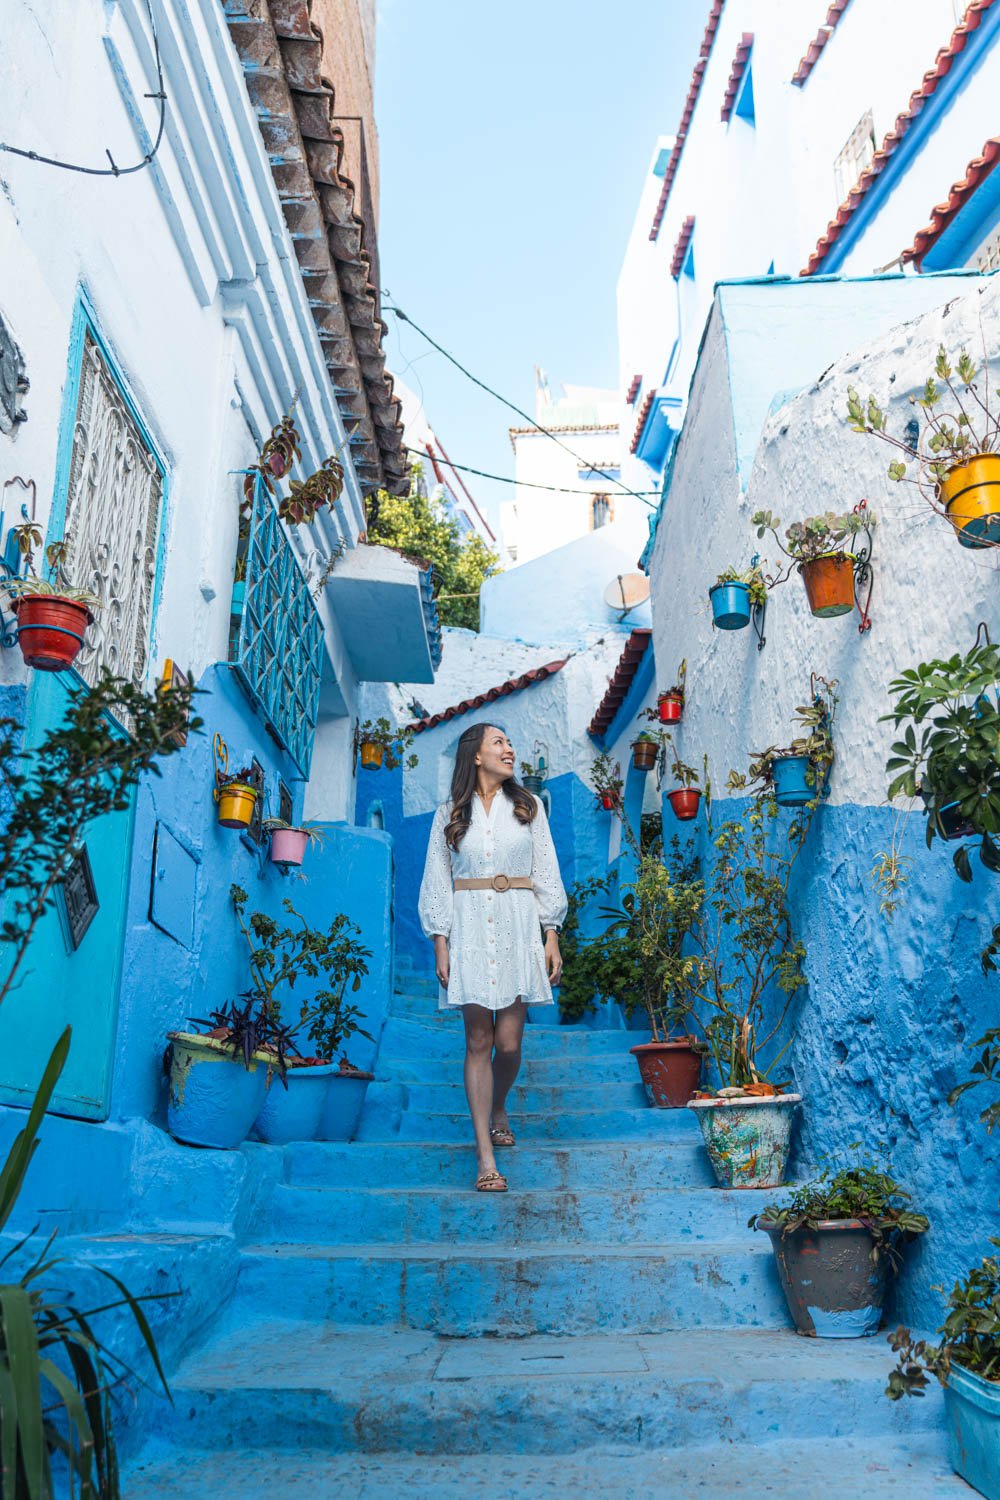 Walking stairs in Chefchaouen.jpg